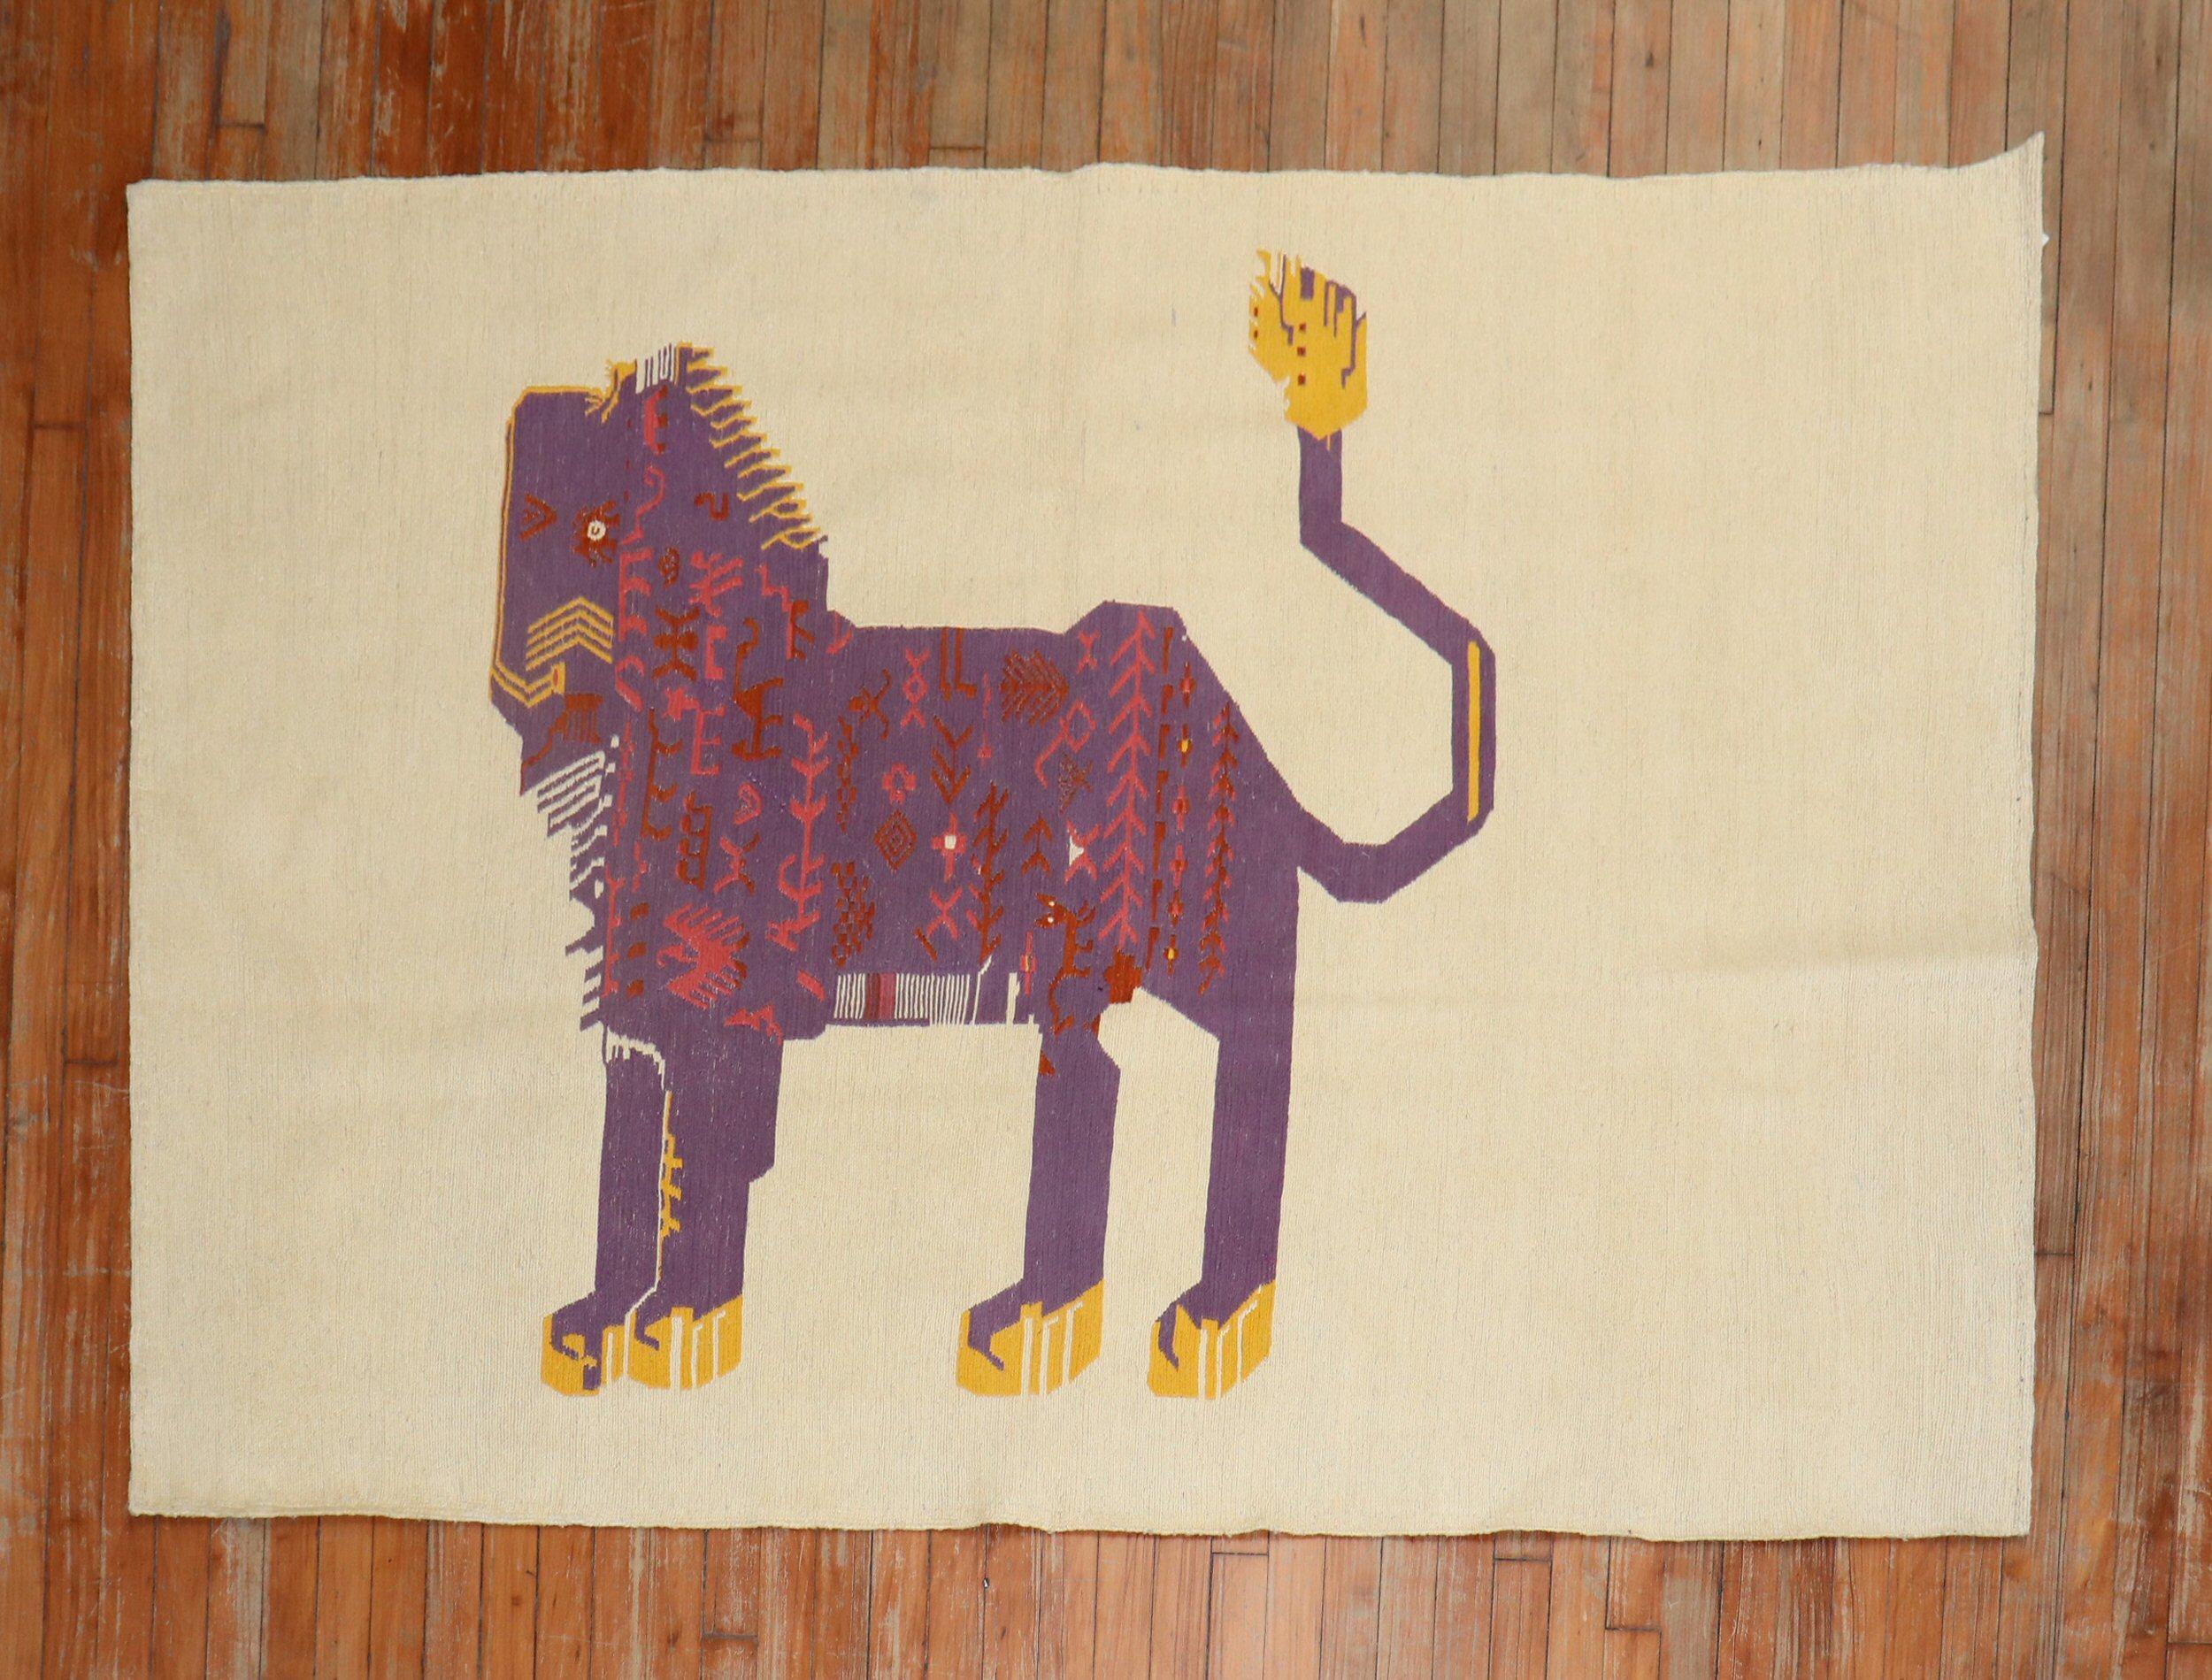 Accent size Persian kilim from the late 20th century with a purple lion on an ivory ground

Measures: 4'5'' x 6'5''.

This was originally belonging to a private Persian collector who requested to make a custom collection of flat-weaves with